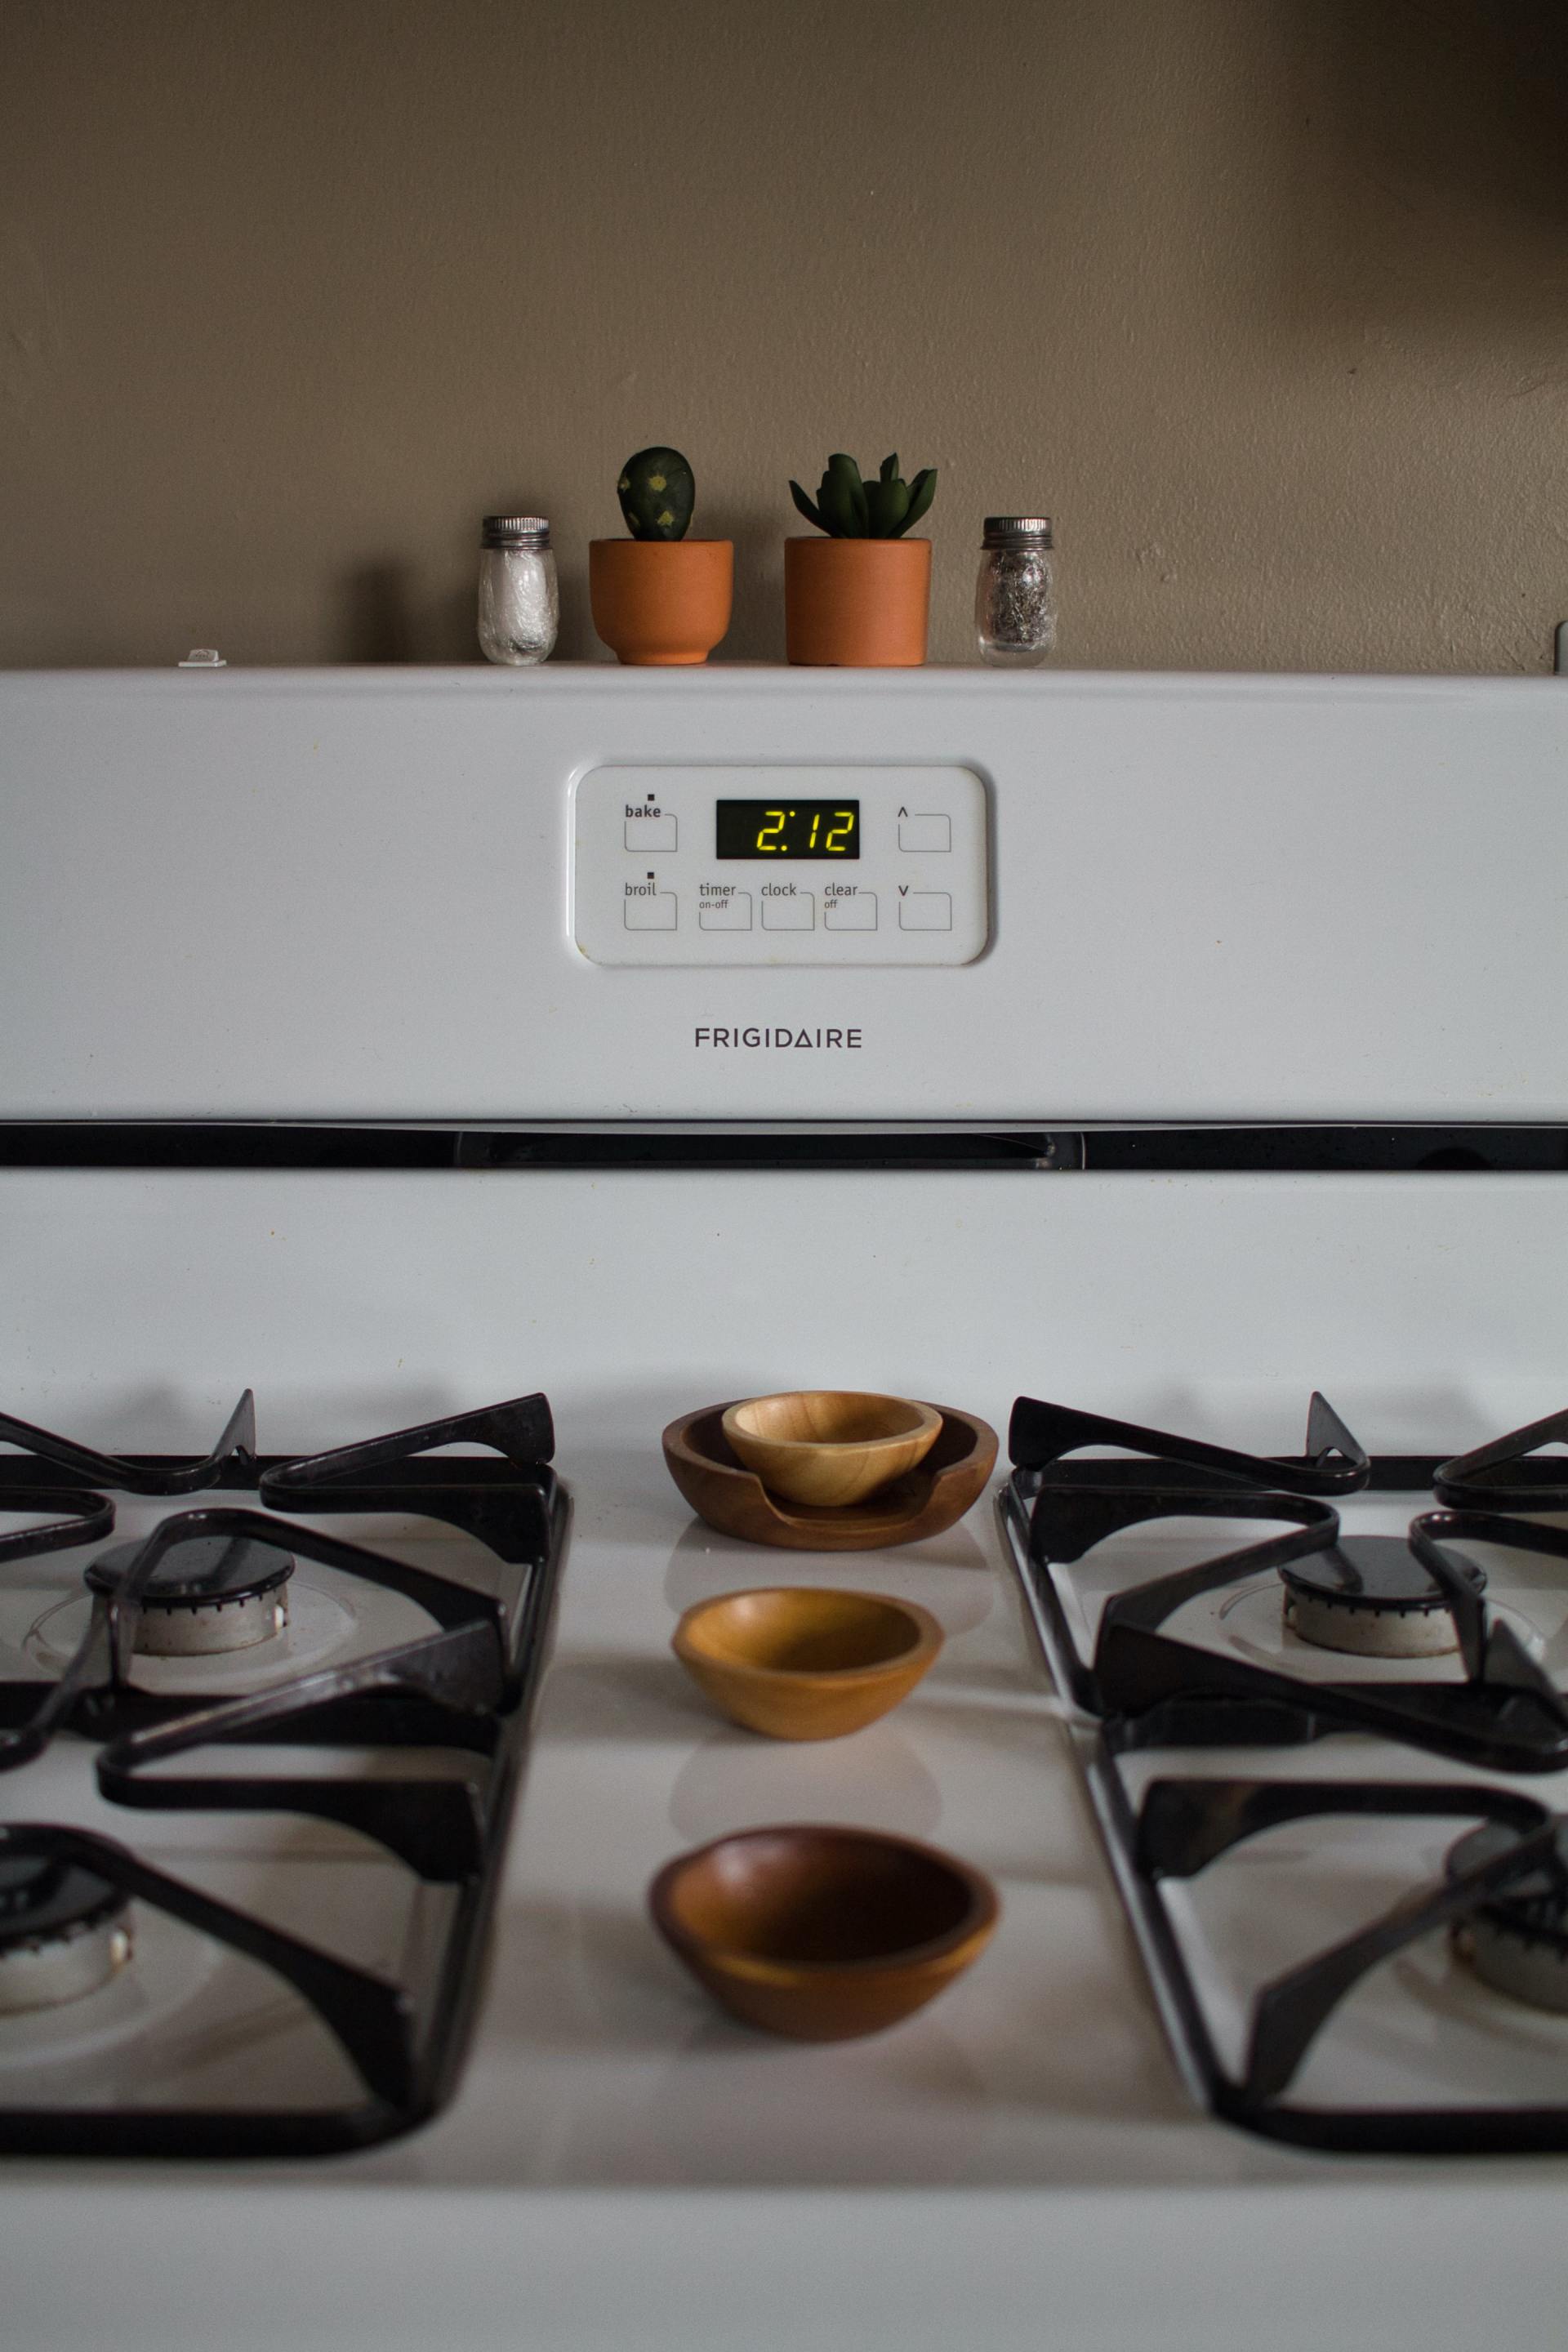 Increasing the Life of your Appliances